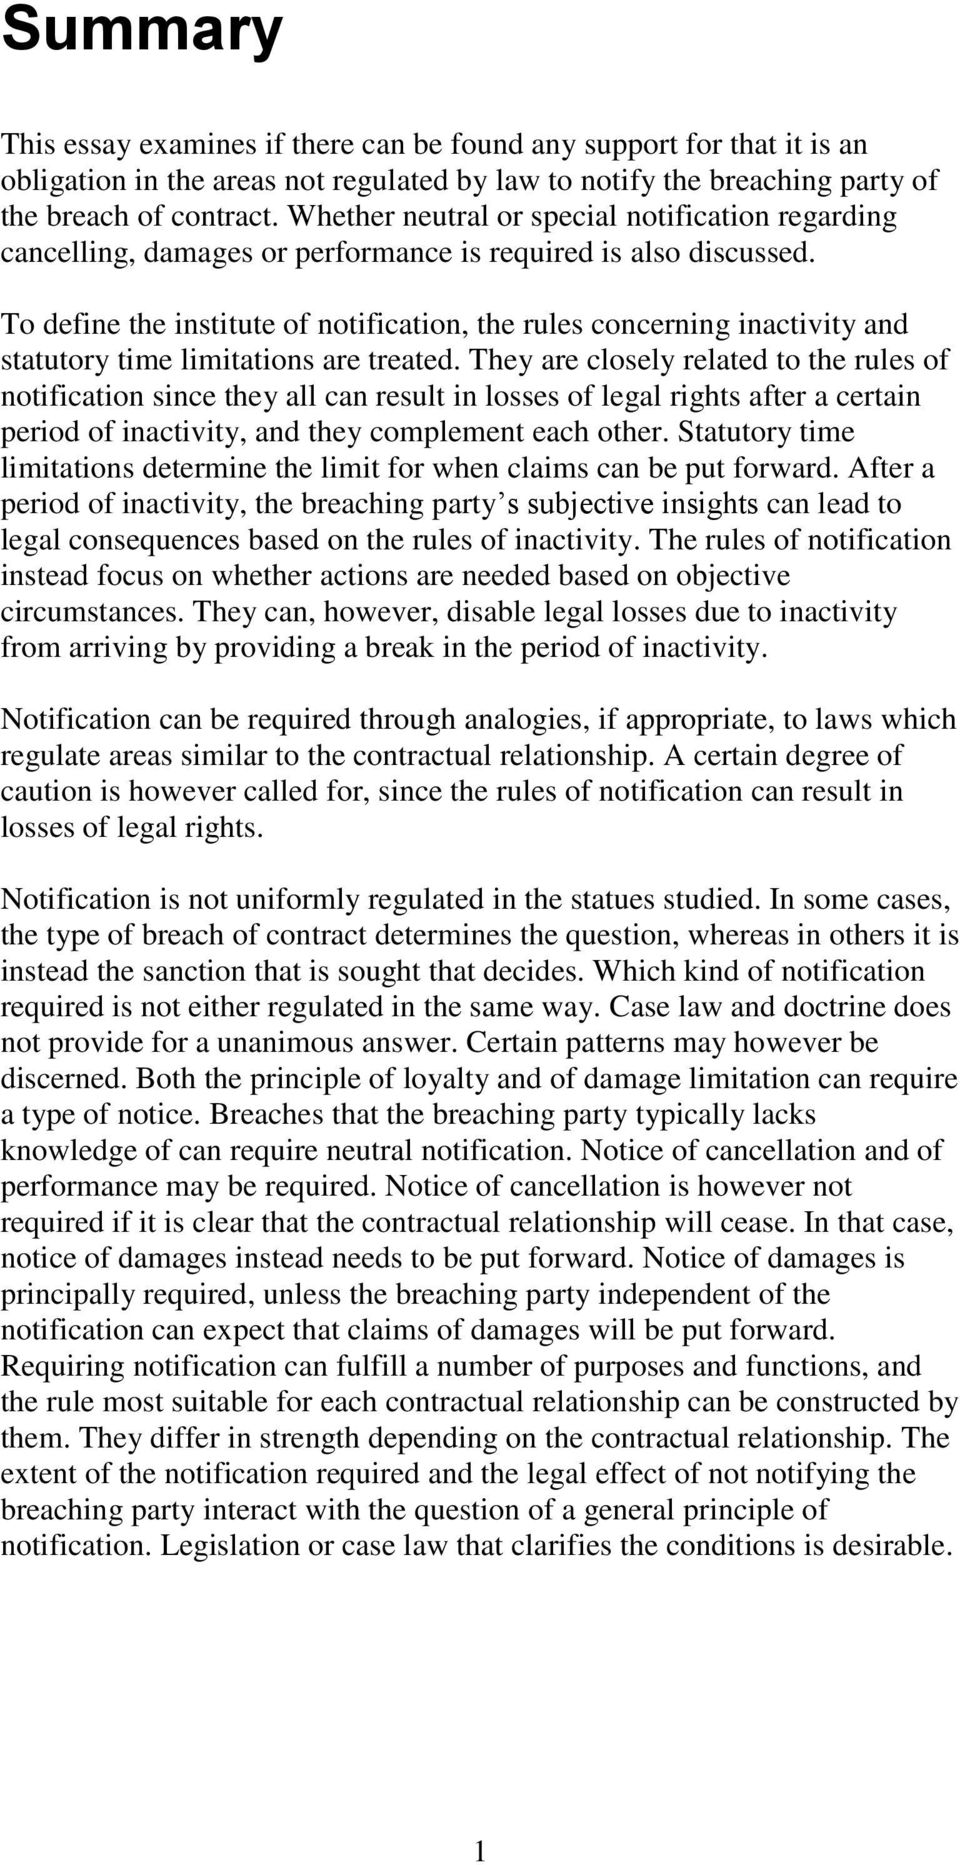 To define the institute of notification, the rules concerning inactivity and statutory time limitations are treated.